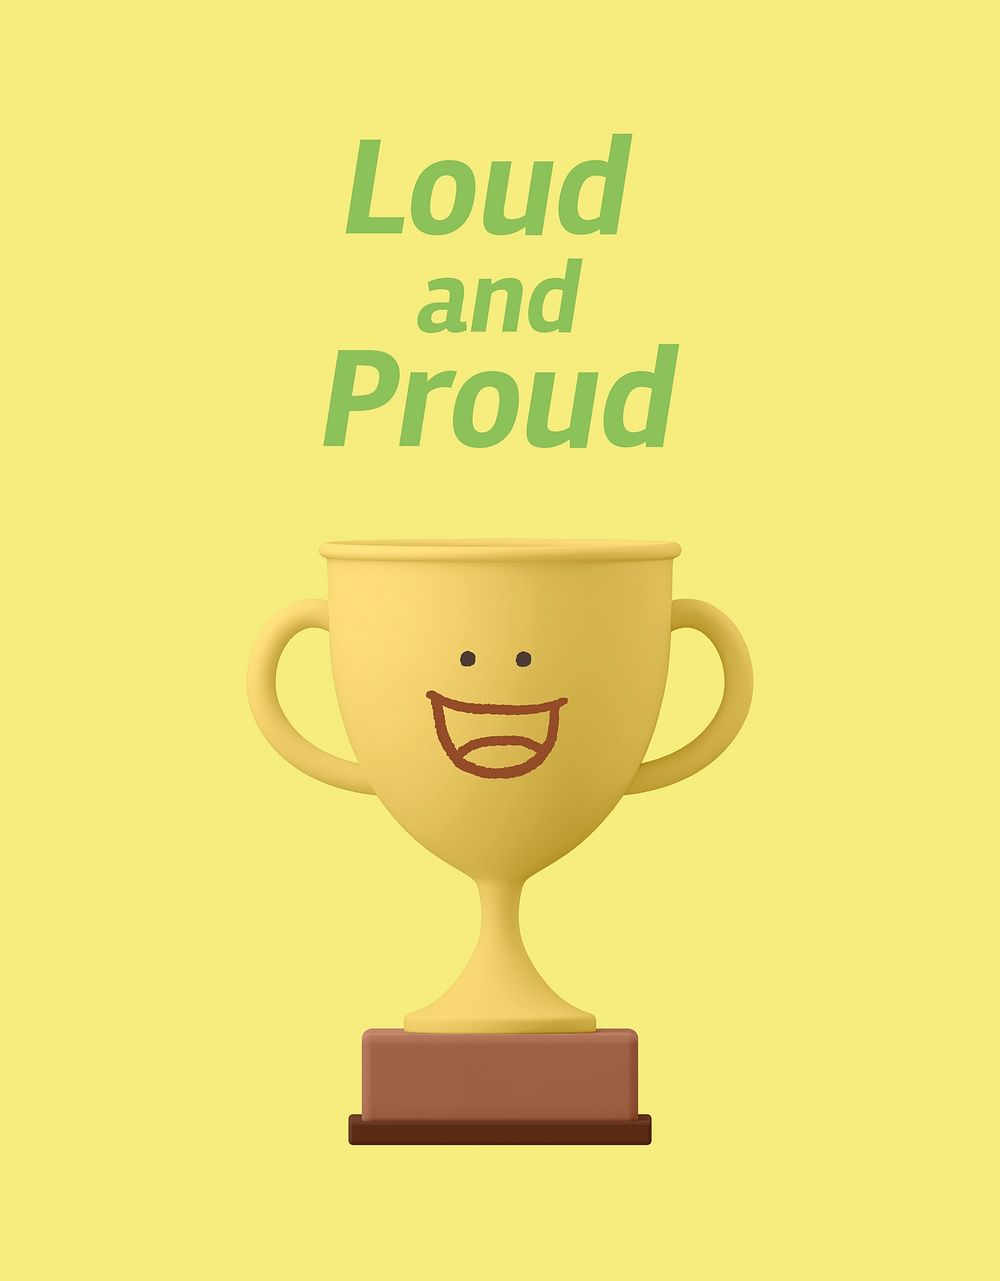 Smiling trophy flyer template, loud and proud quote vector